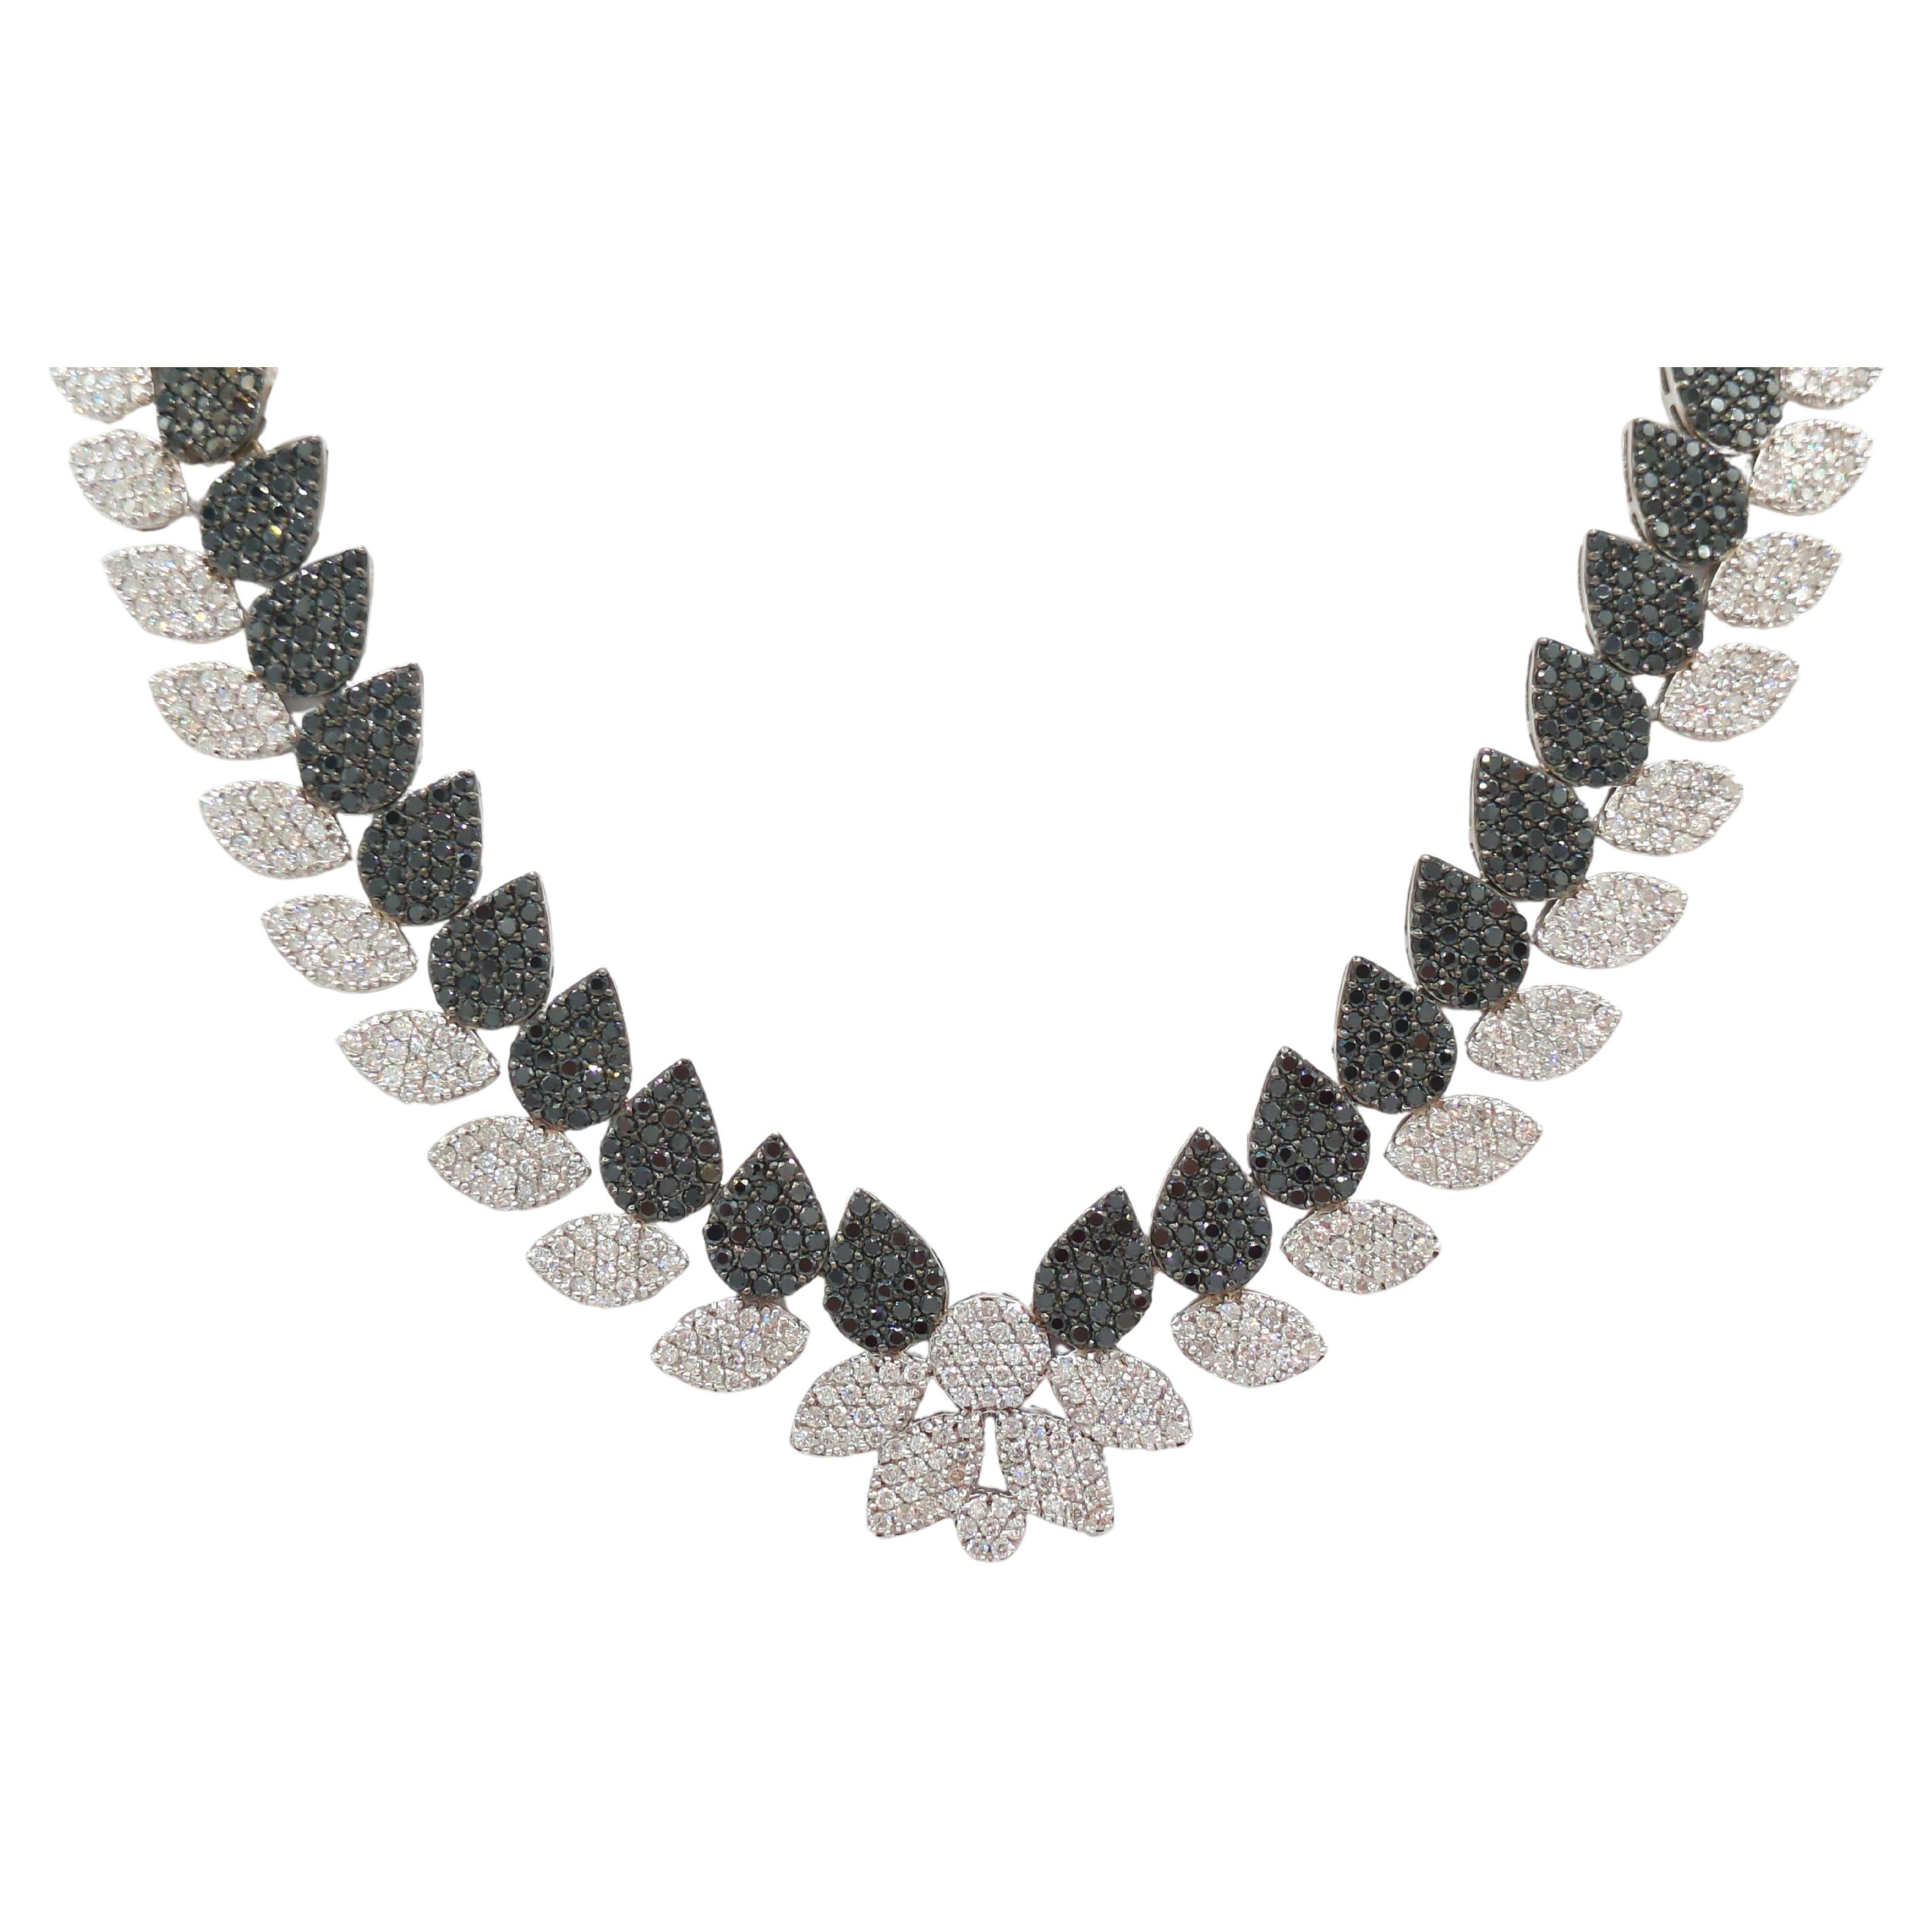 White and Black Diamond Necklace in 18K White Gold